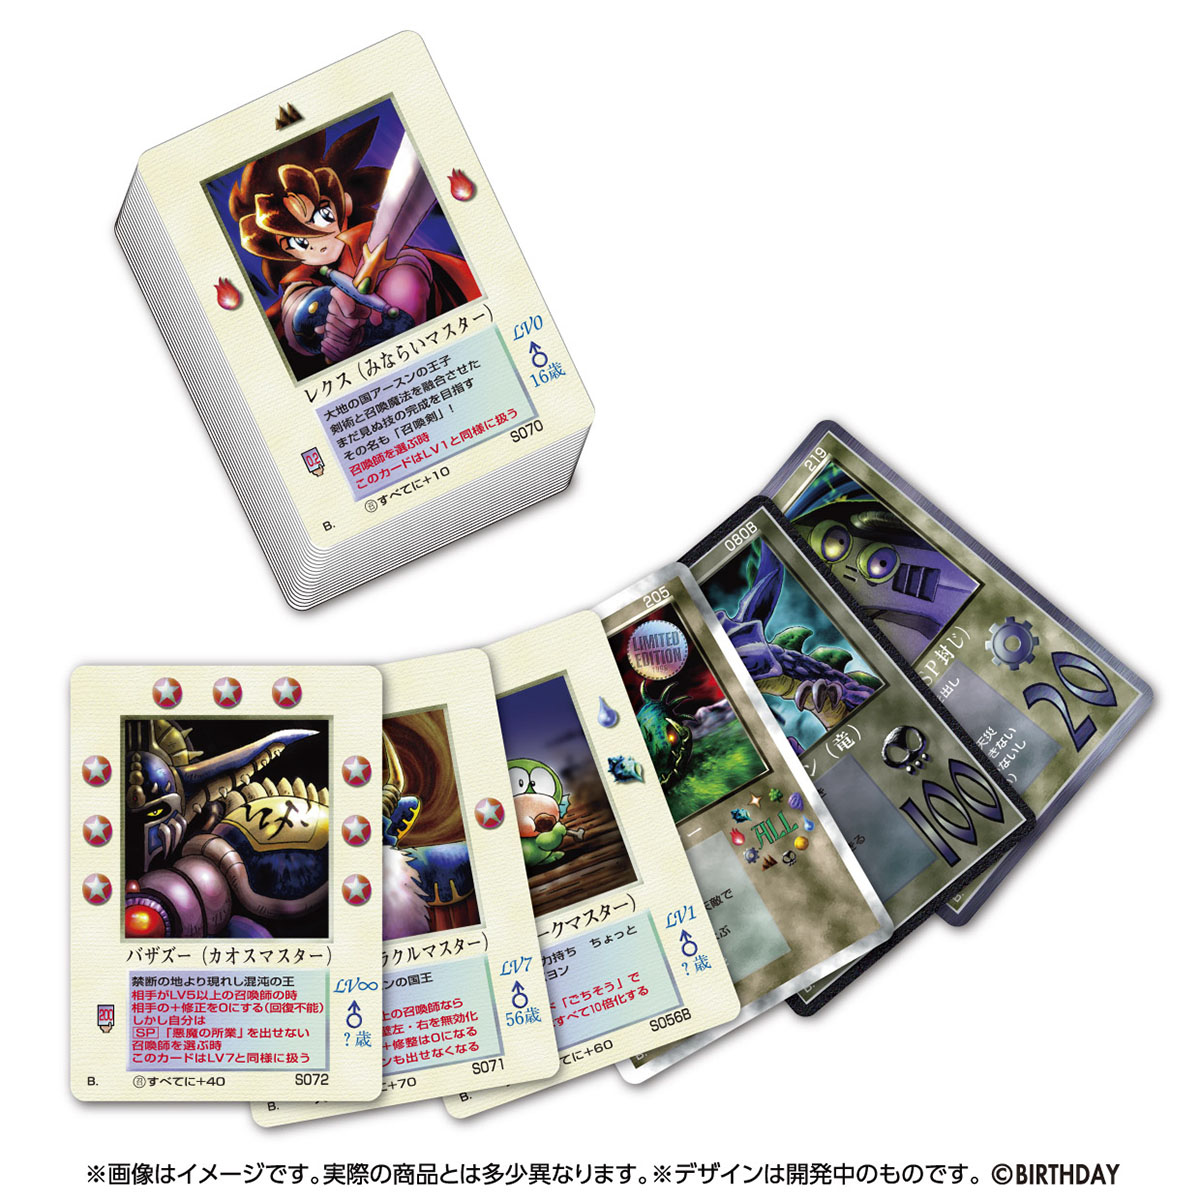 DAIKAIJUU MONOGATARI THE MIRACLE OF THE ZONE GLYPH WHIRL EDITION SPECIAL BOOSTER BOX